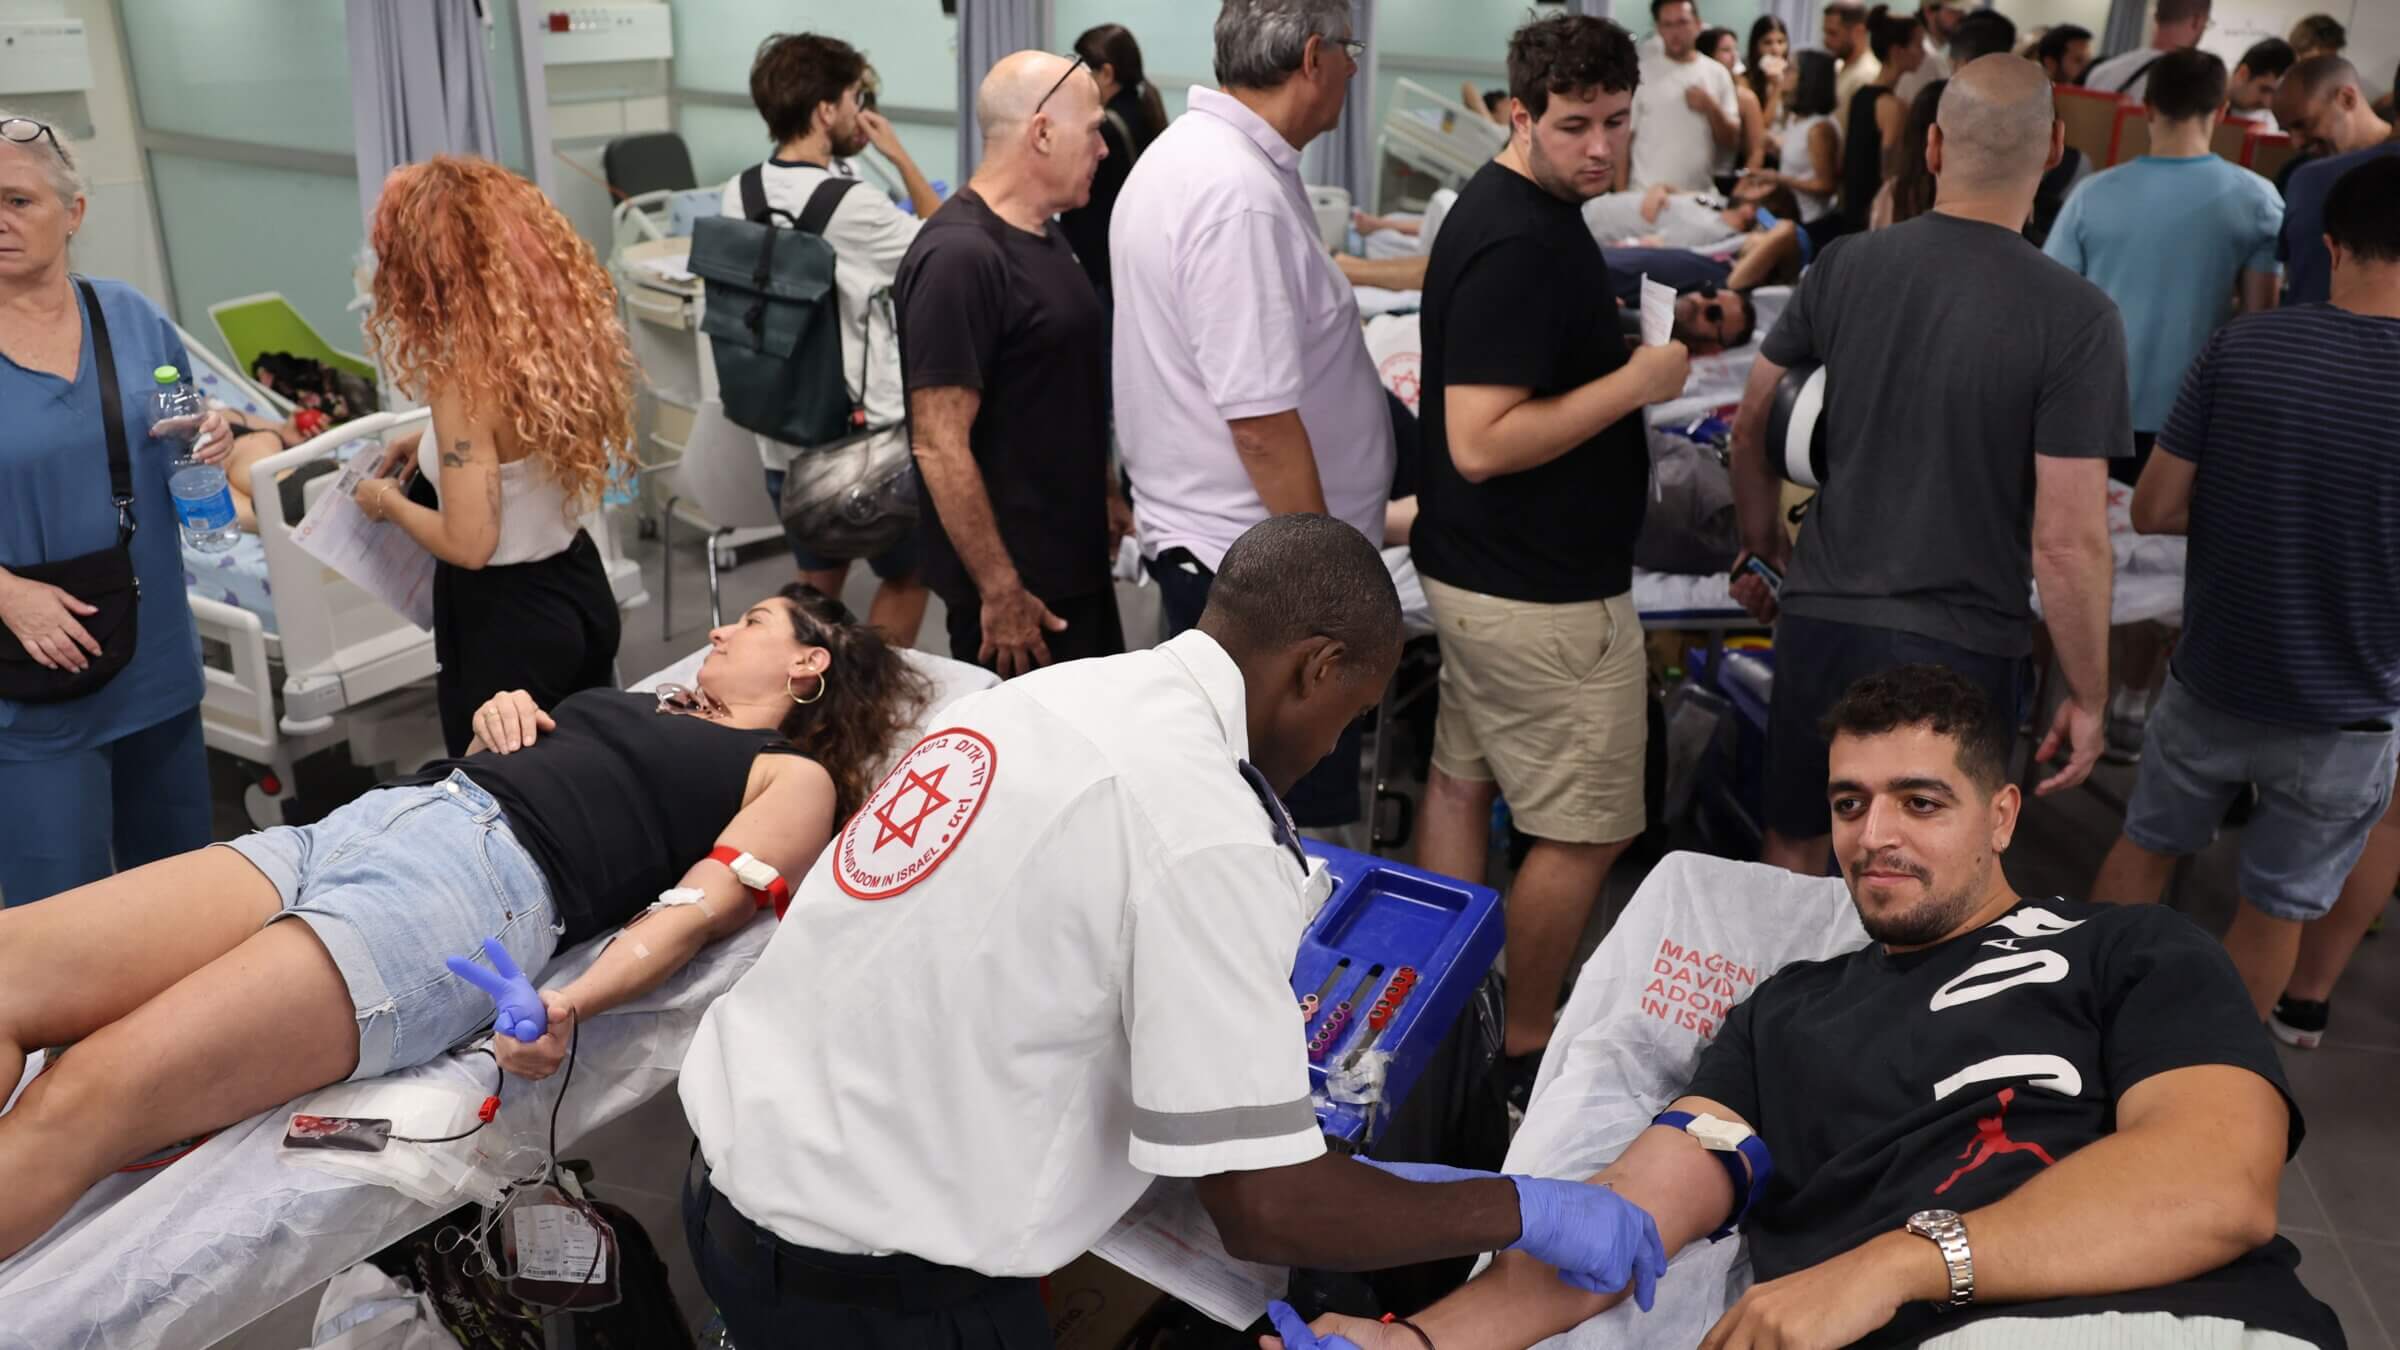 Israelis donate blood at a hospital in Tel Aviv on Oct. 7, 2023, after a barrage of rockets were fired and fighters from the Gaza Strip infiltrated Israel, a major escalation in the Israeli-Palestinian conflict